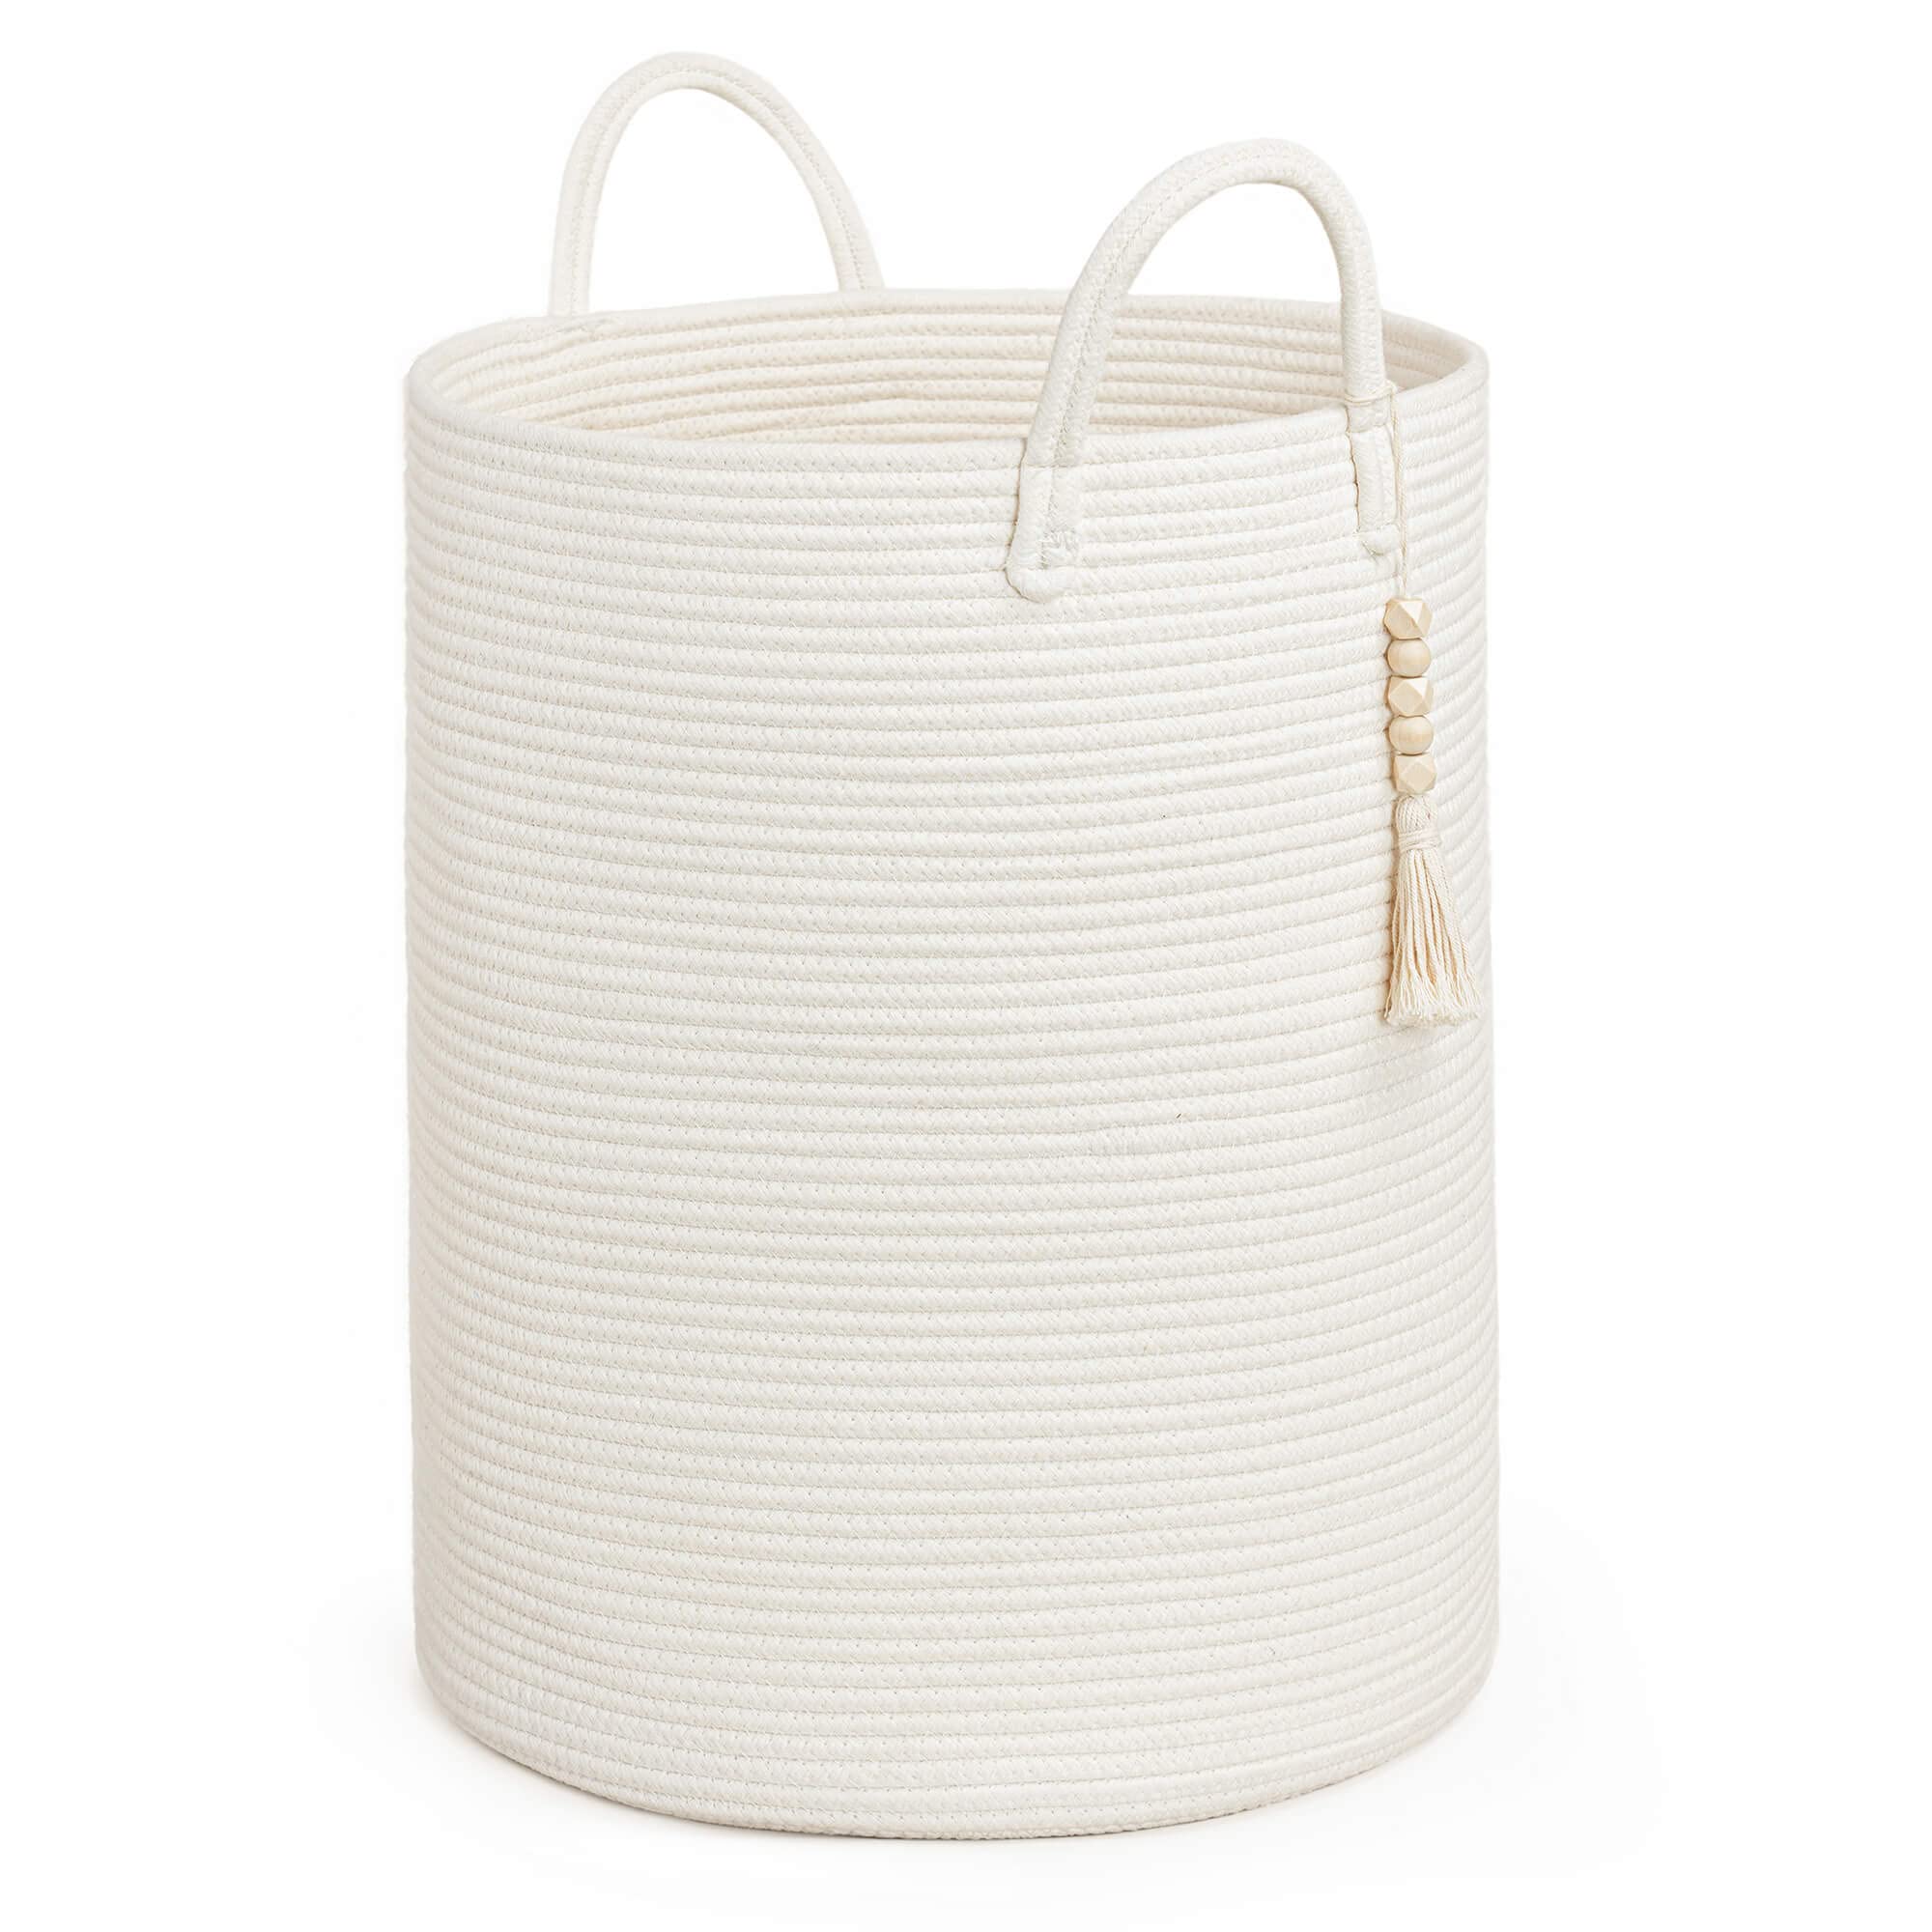 Goodpick White Tall Wicker Laundry Basket with handles